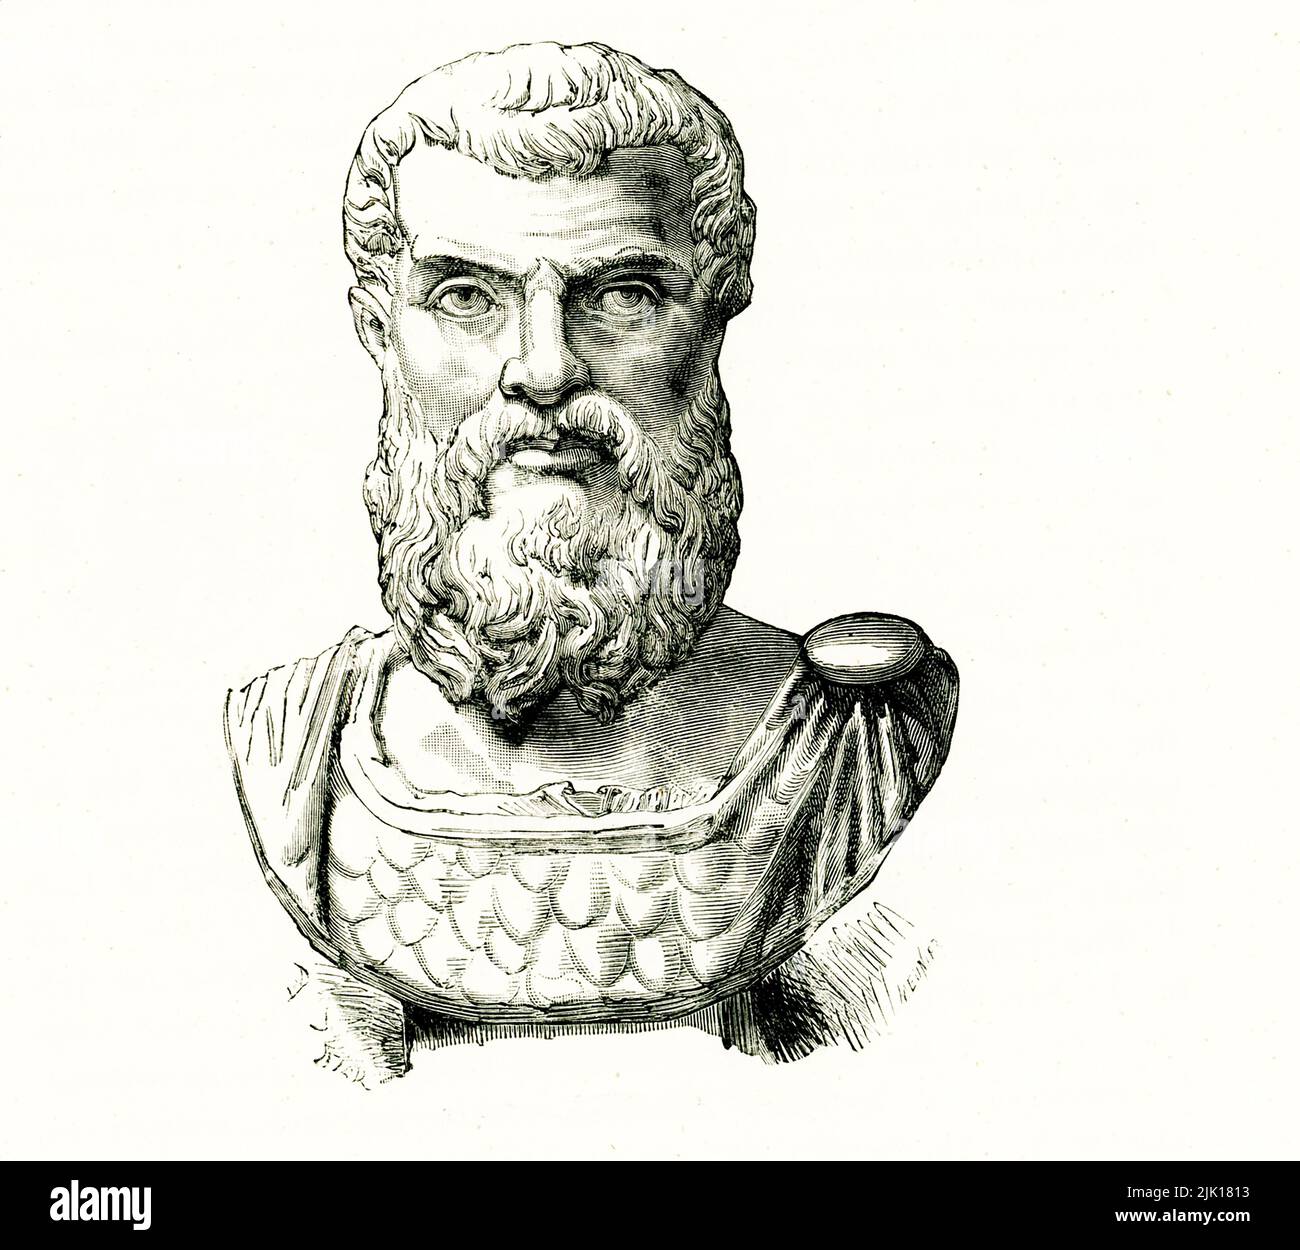 The 1884 caption reads: 'Emperor Pertinax - colossal marble bust found at Pozzuoli.'  Publius Helvius Pertinax was the son of a humble charcoal-burner. After a successful career in the military, as a senator and then as praefect of the city of Rome, he reluctantly accepted the throne offered by the murderers of Commodus. Pertinax immediately began a campaign of reform, which made him quite unpopular. After 86 days in office, a group of mutinous Praetorians broke into the palace and murdered Pertinax in 193 AD Stock Photo